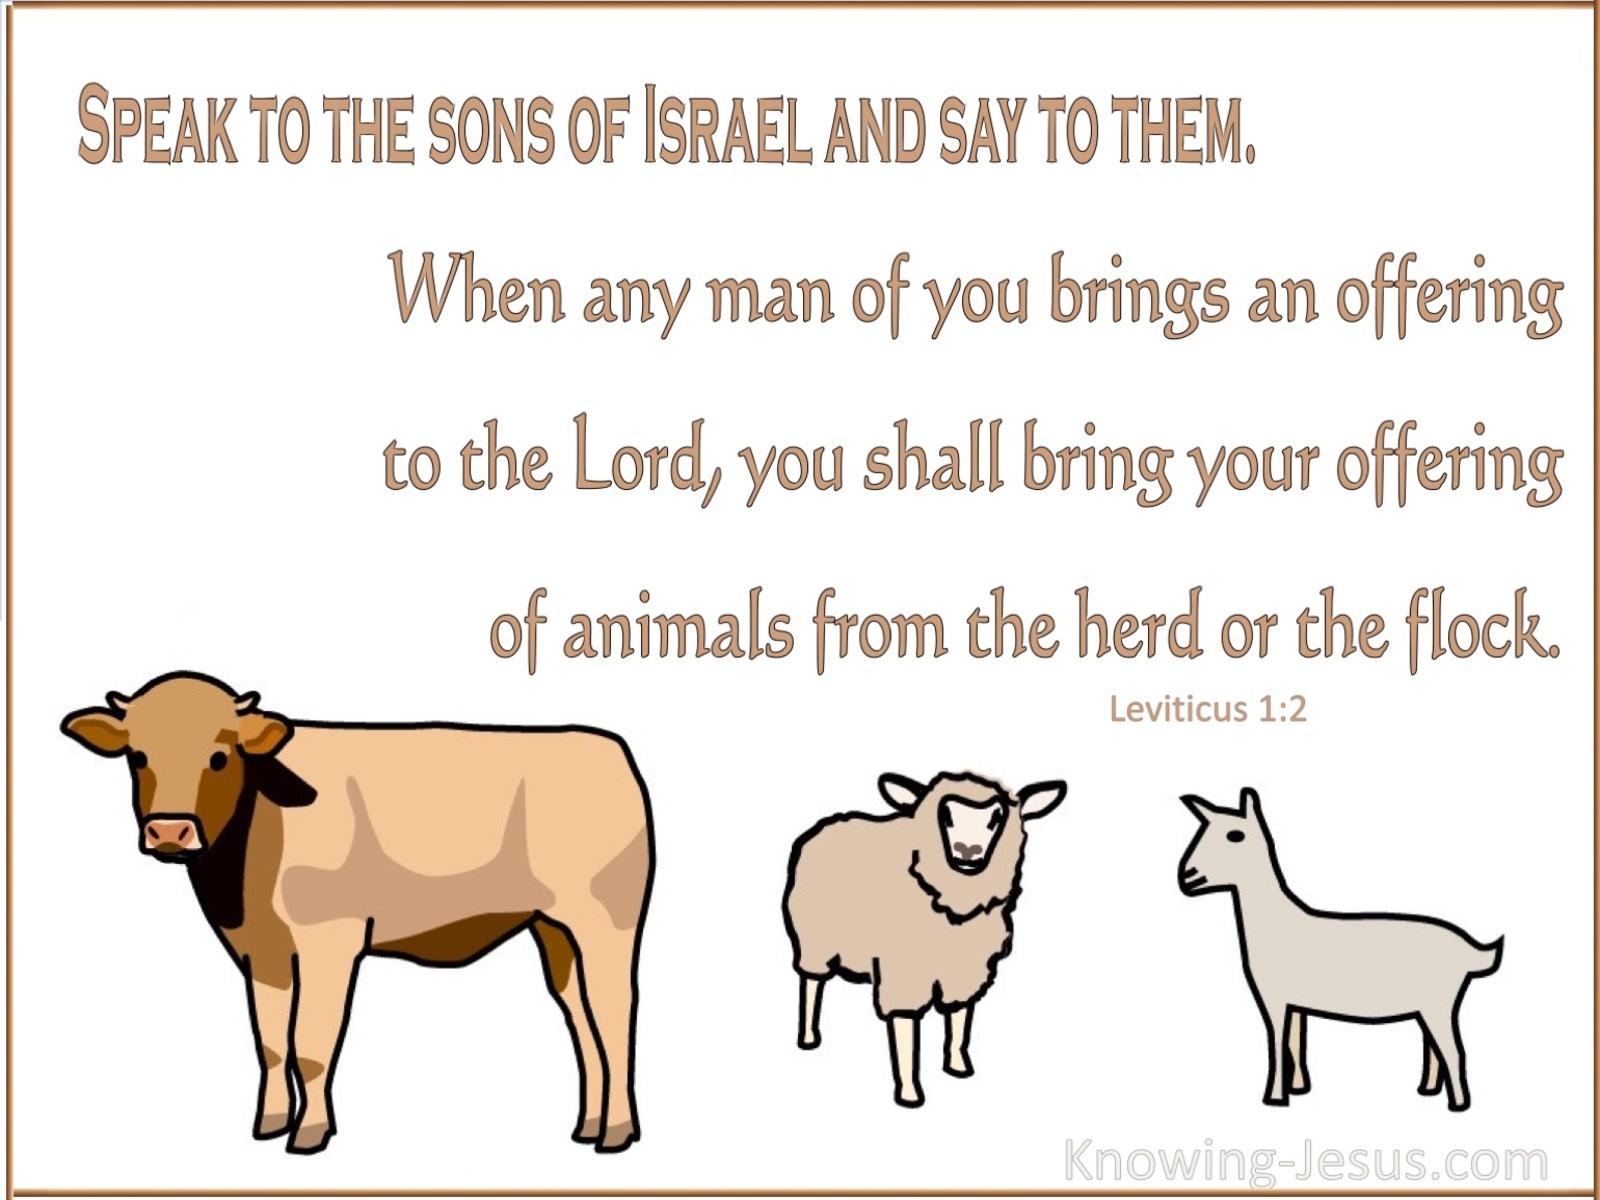 Leviticus 1:2 Bring Your Offering Of Animals From The Herd Or The Flock (white)